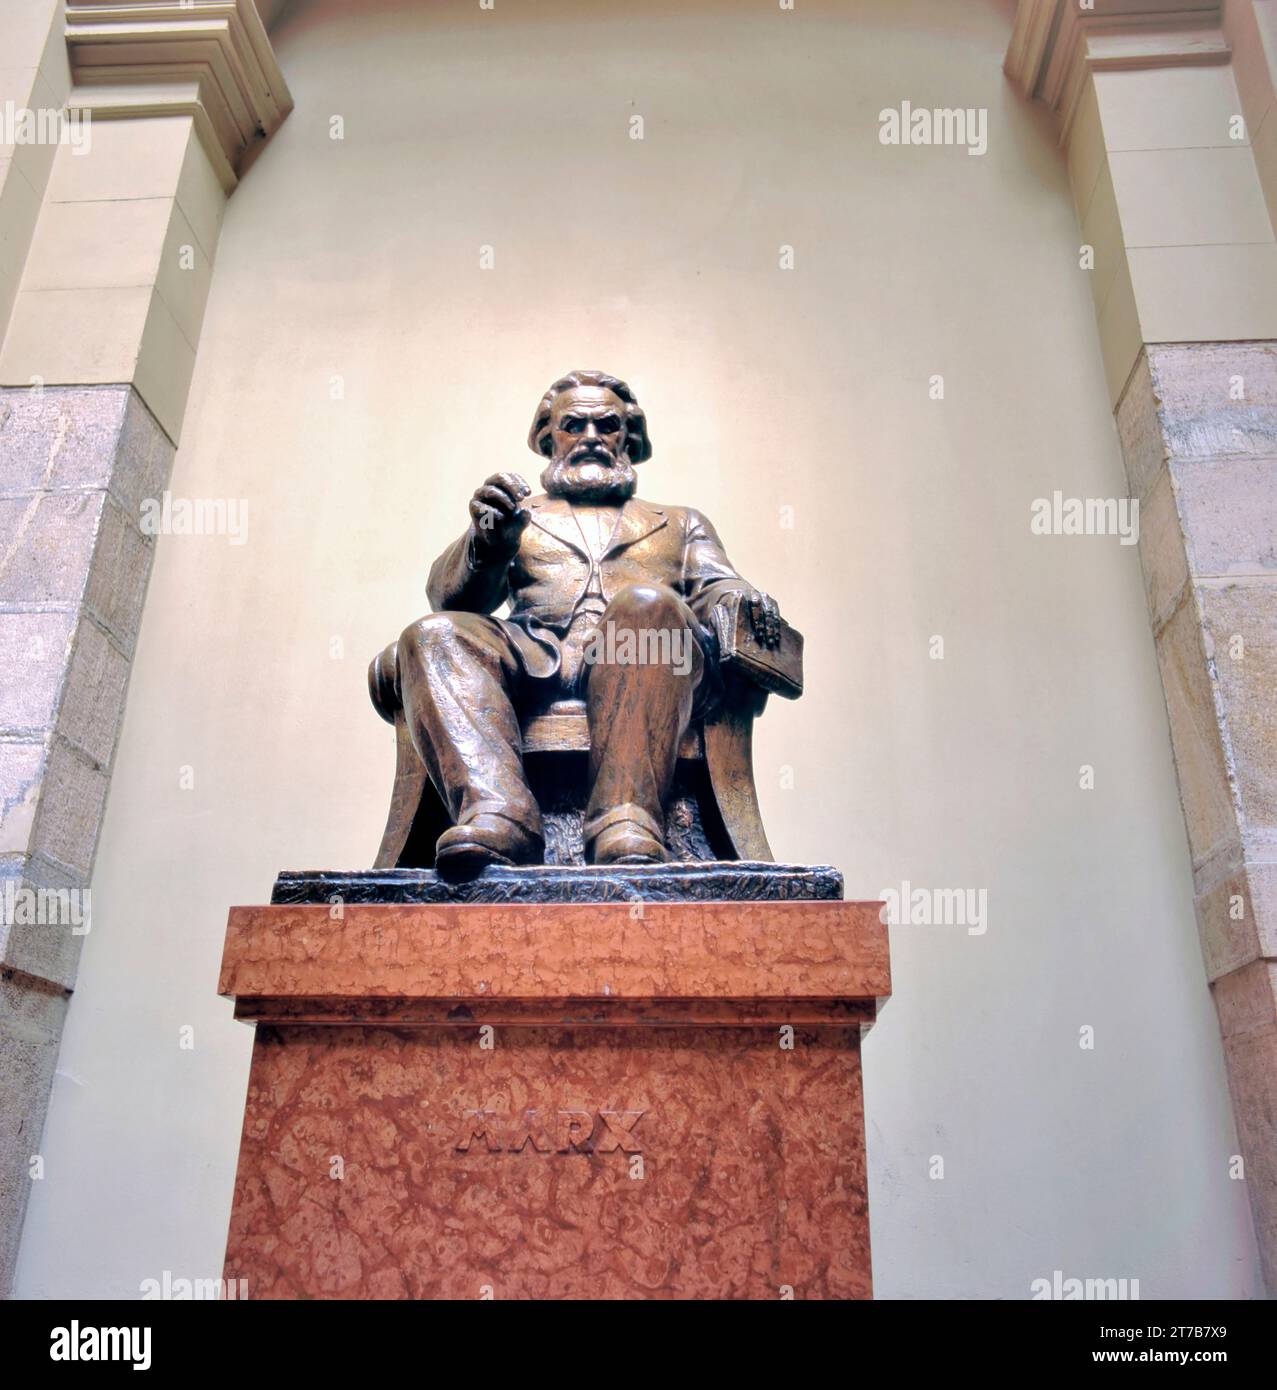 BUDAPEST, HUNGARY-MAY 08, 1995: Statue of the famous thinker, Karl Marx at the University of Economic Sciences. Stock Photo